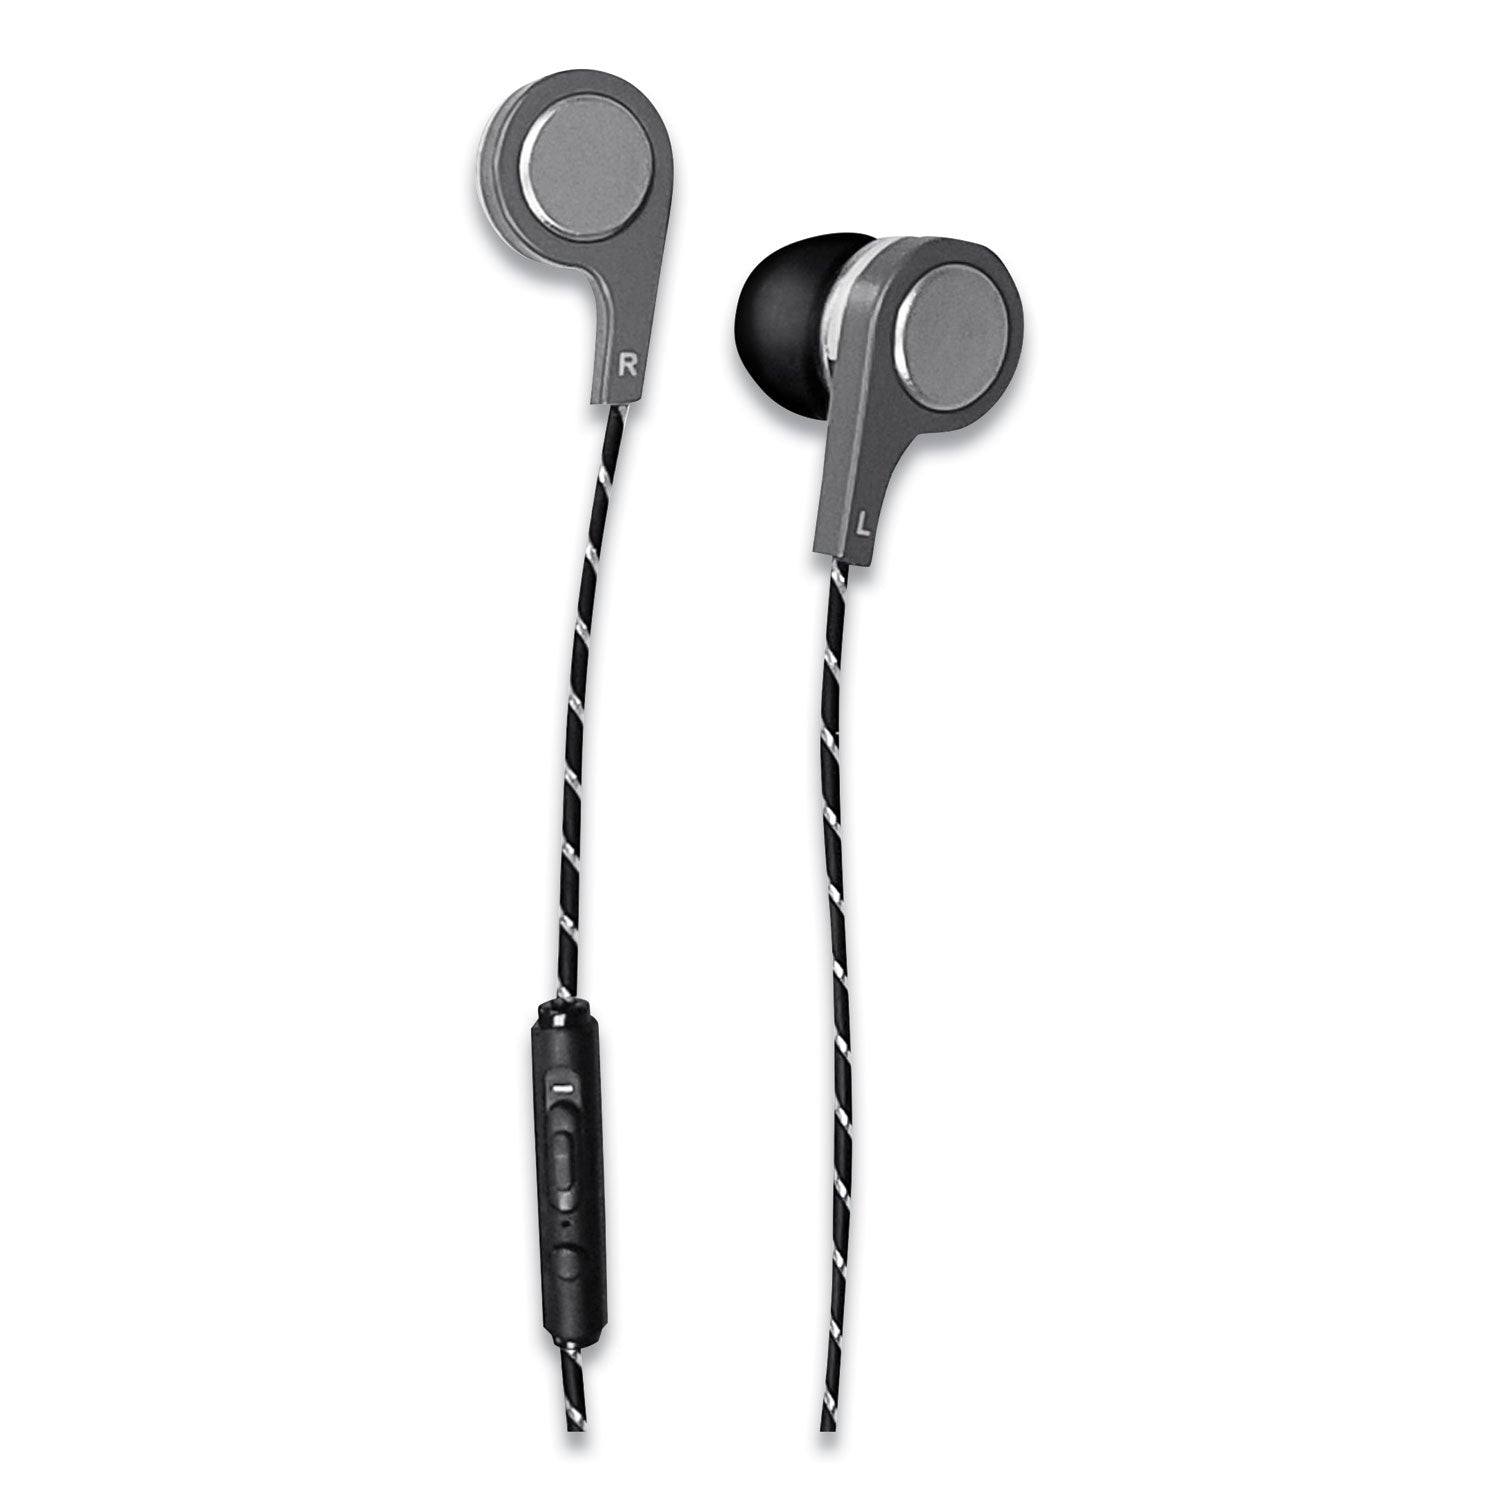 bass-13-metallic-earbuds-with-microphone-4-ft-cord-silver_max199600 - 1